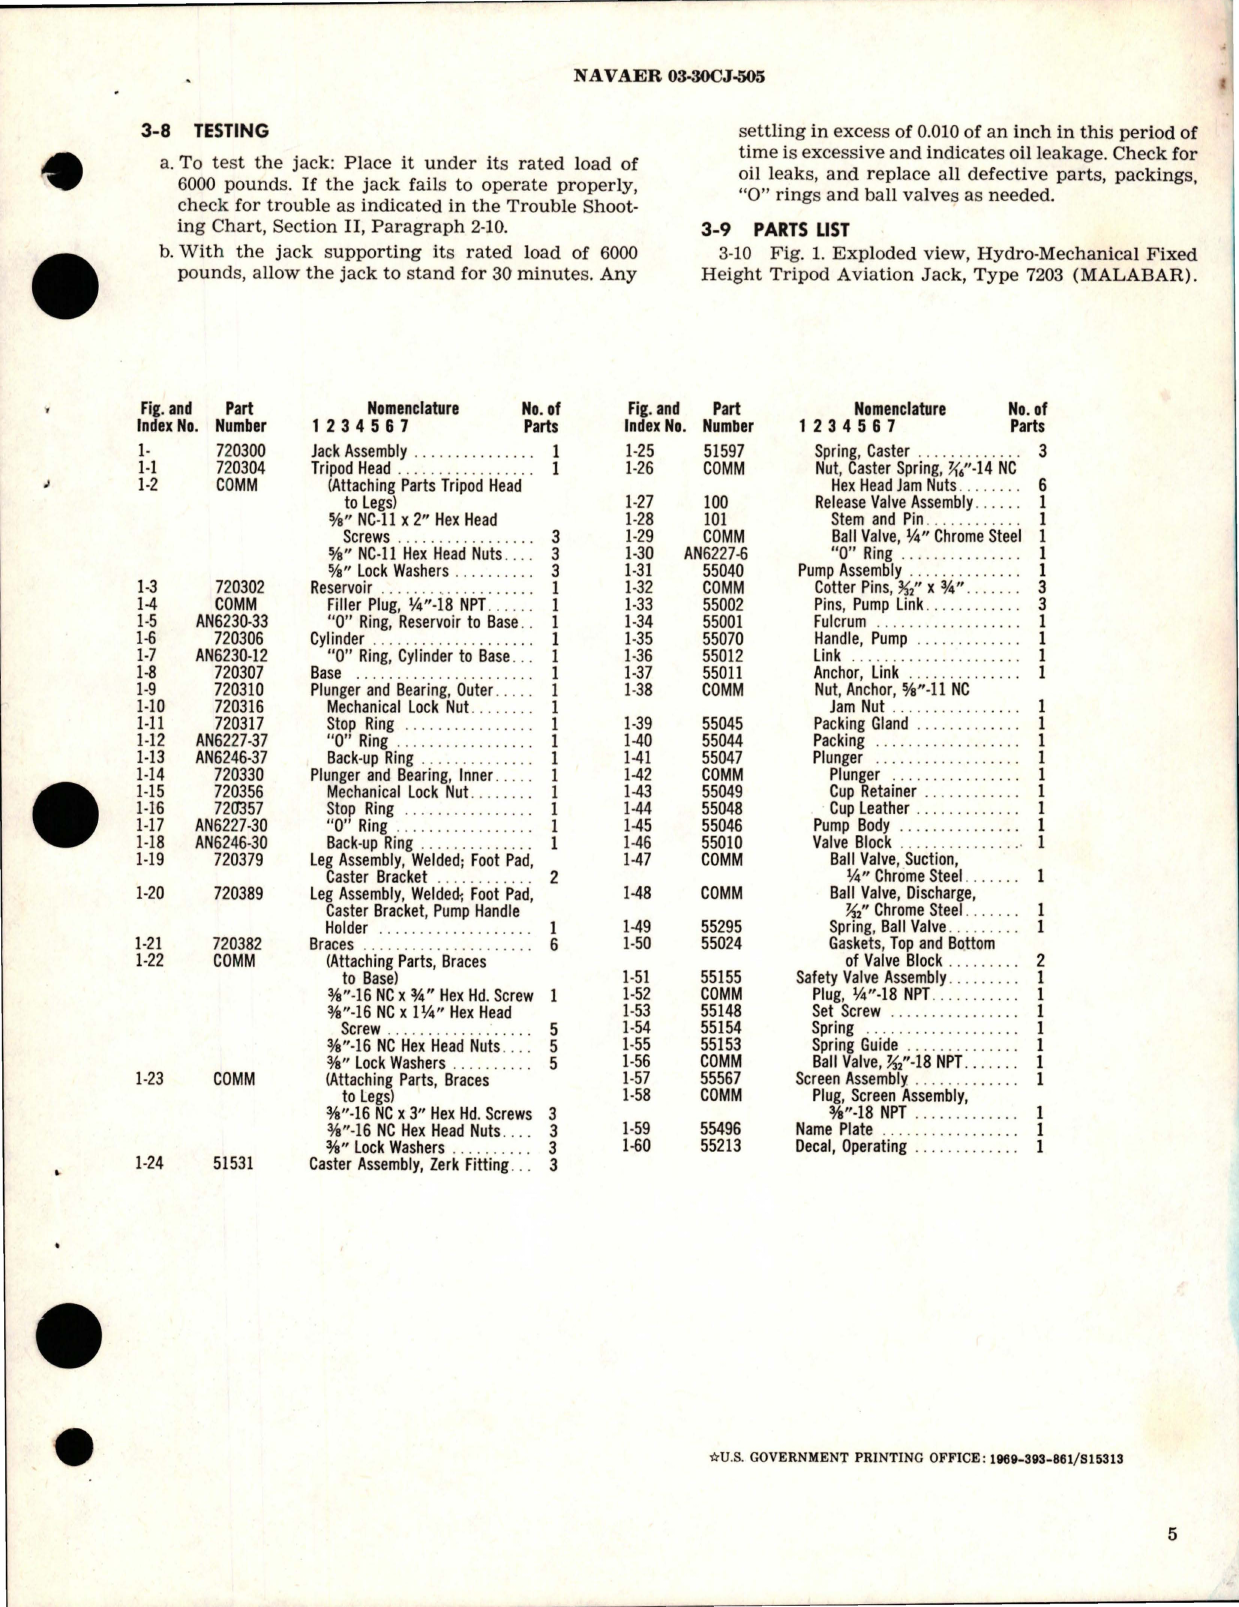 Sample page 5 from AirCorps Library document: Operations, Service and Overhaul Instructions with Parts for Single Stage Type Hydro Mechanical Aviation Jack - 7203